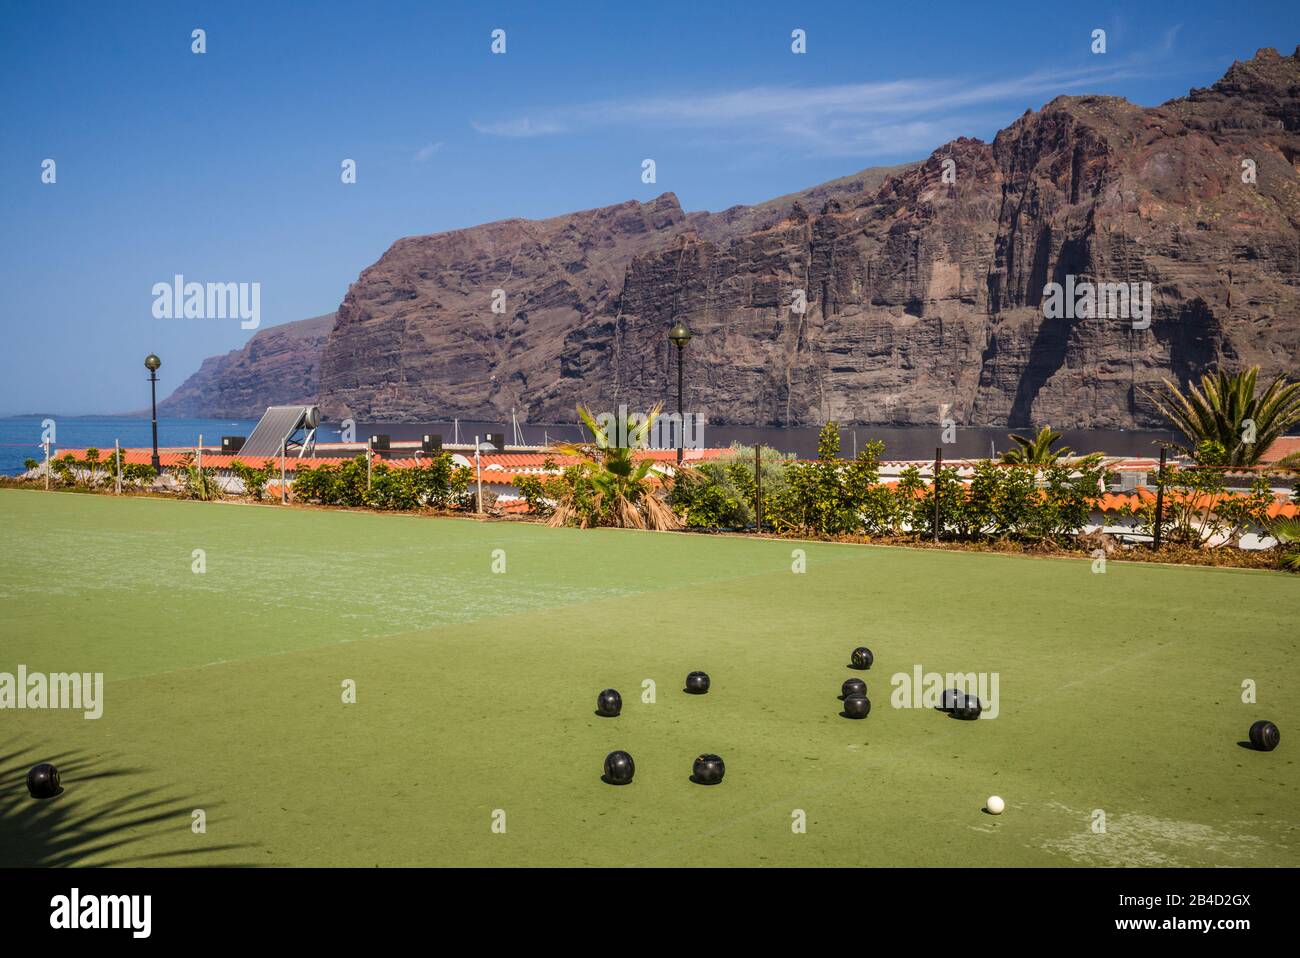 Spain, Canary Islands, Tenerife Island, Los Gigantes, lawn bowling court Stock Photo